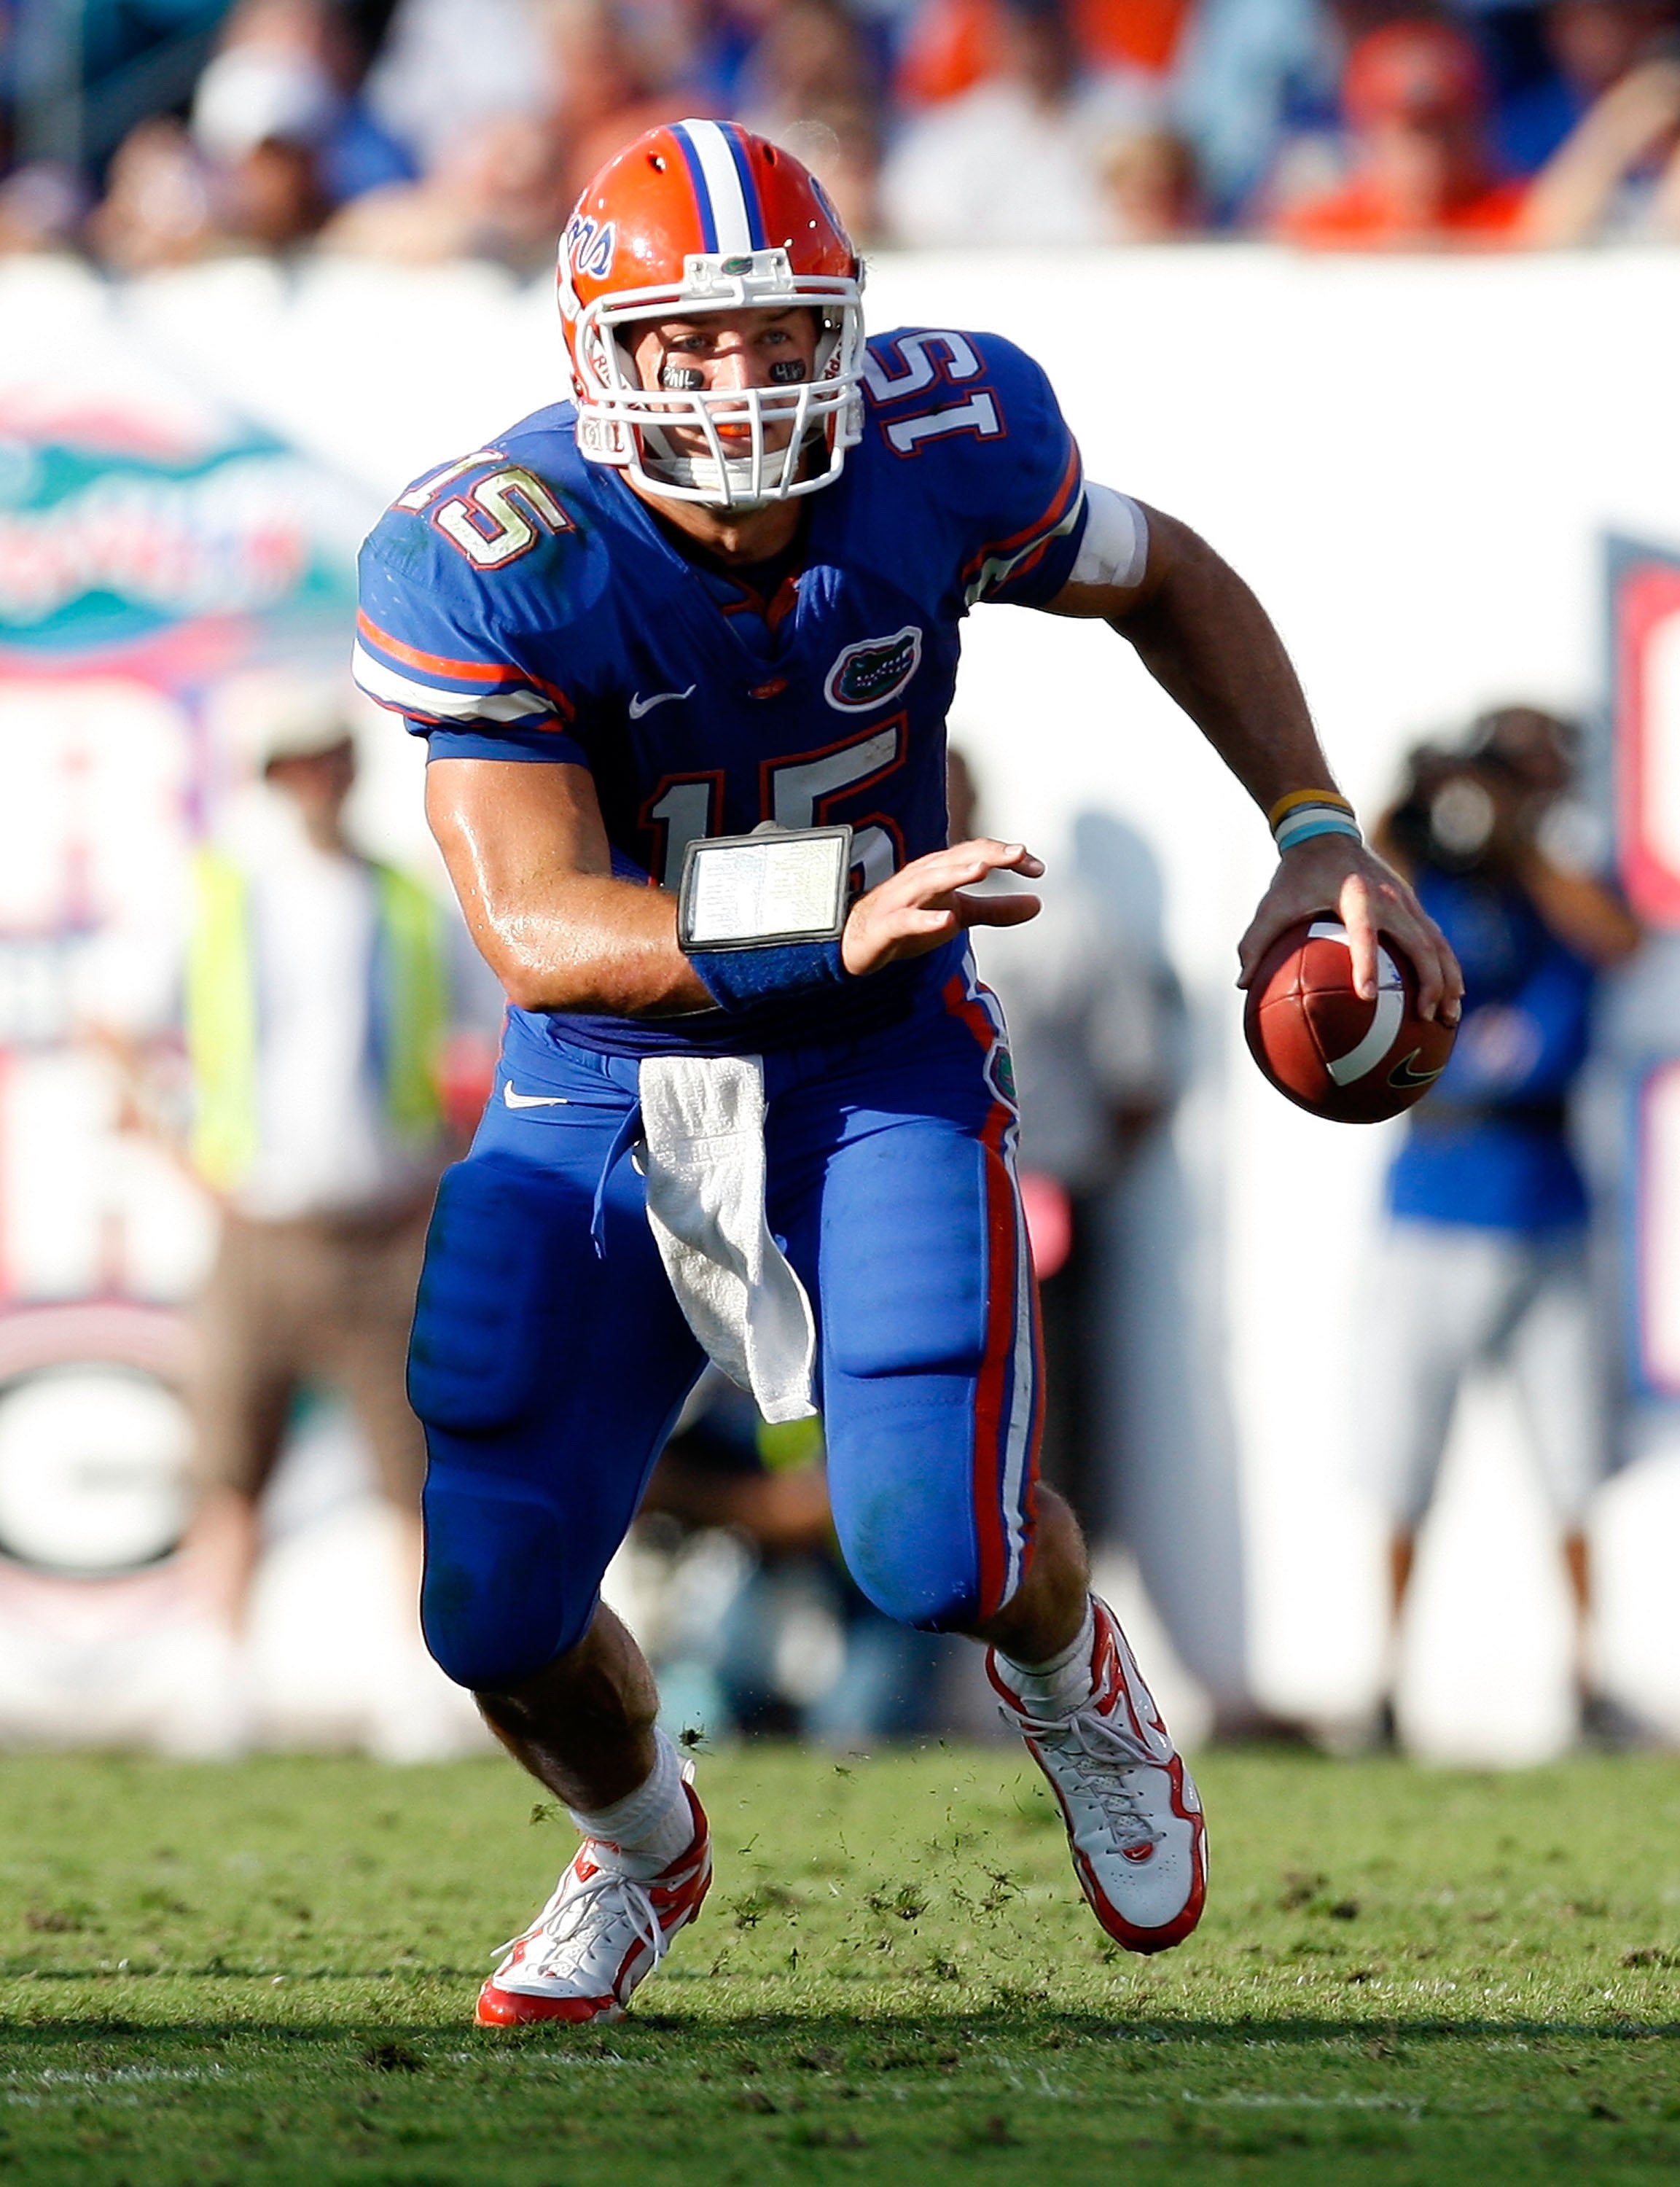 JACKSONVILLE, FL - OCTOBER 31:  Quarterback Tim Tebow #15 of the Florida Gators against the Georgia Bulldogs at Jacksonville Municipal Stadium on October 31, 2009 in Jacksonville, Florida.  (Photo by Kevin C. Cox/Getty Images)